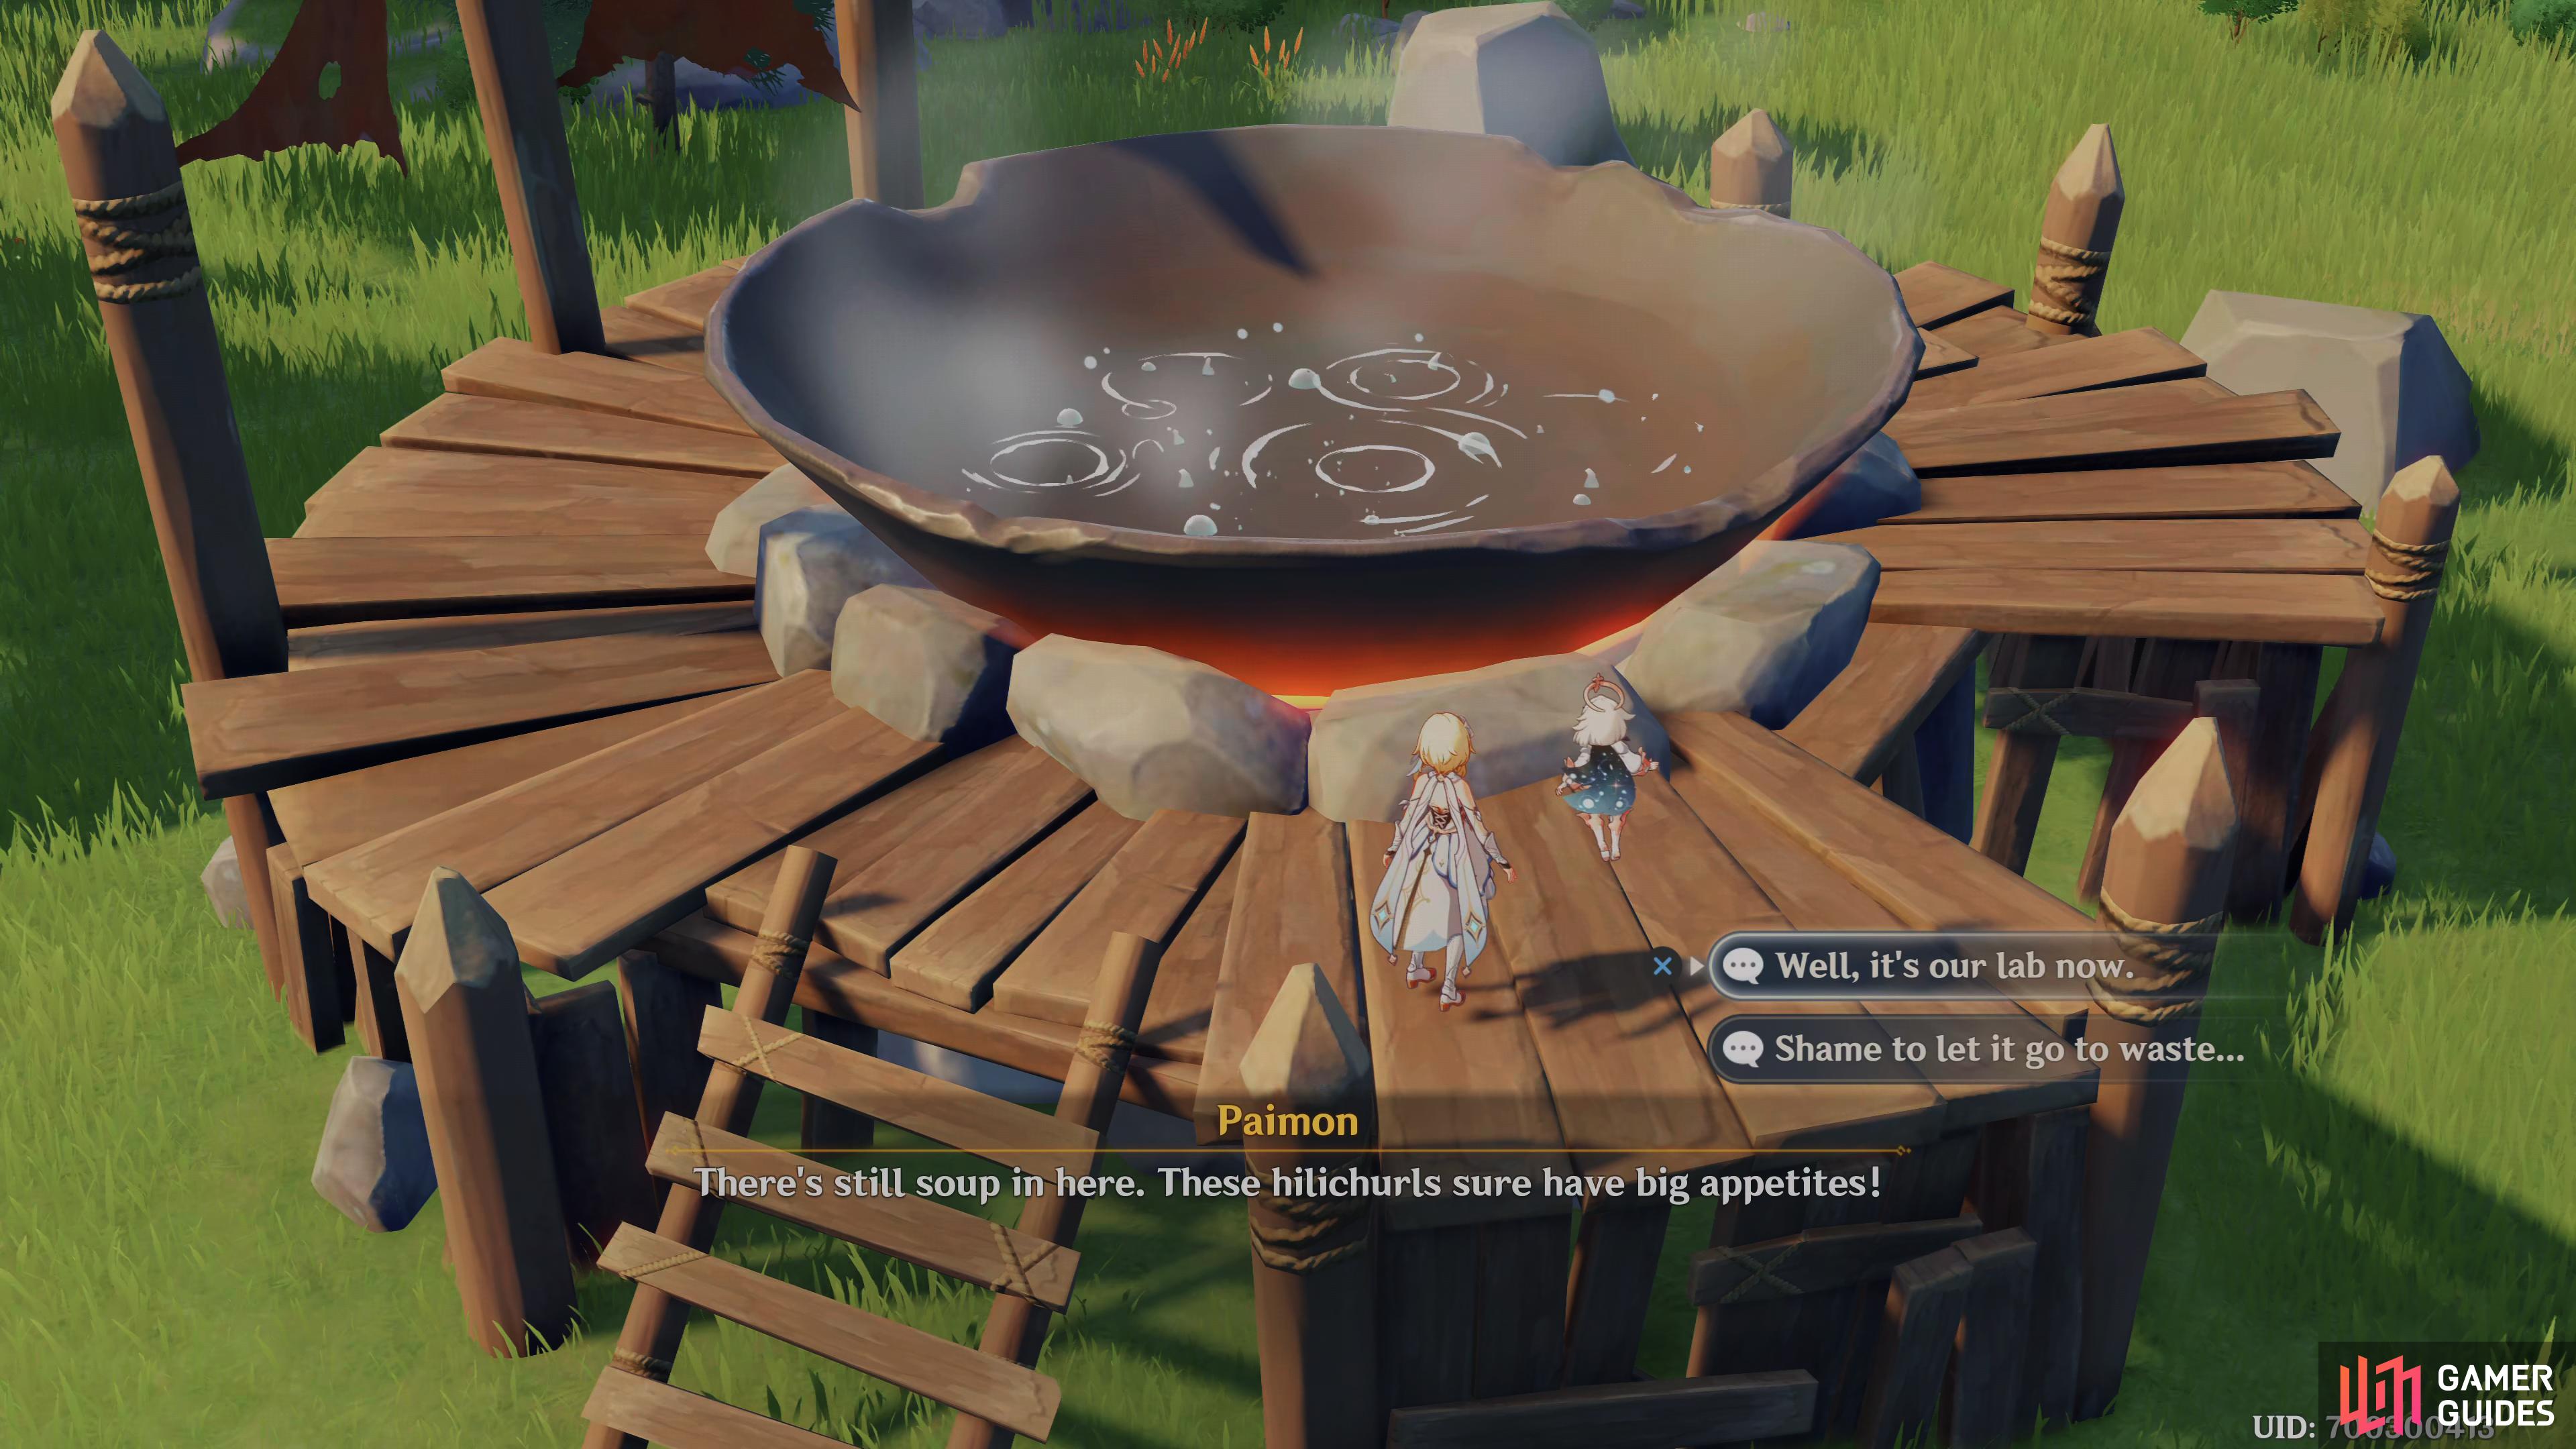 use any Pyro characters you have to heat up the pot before dealing with the enemies.